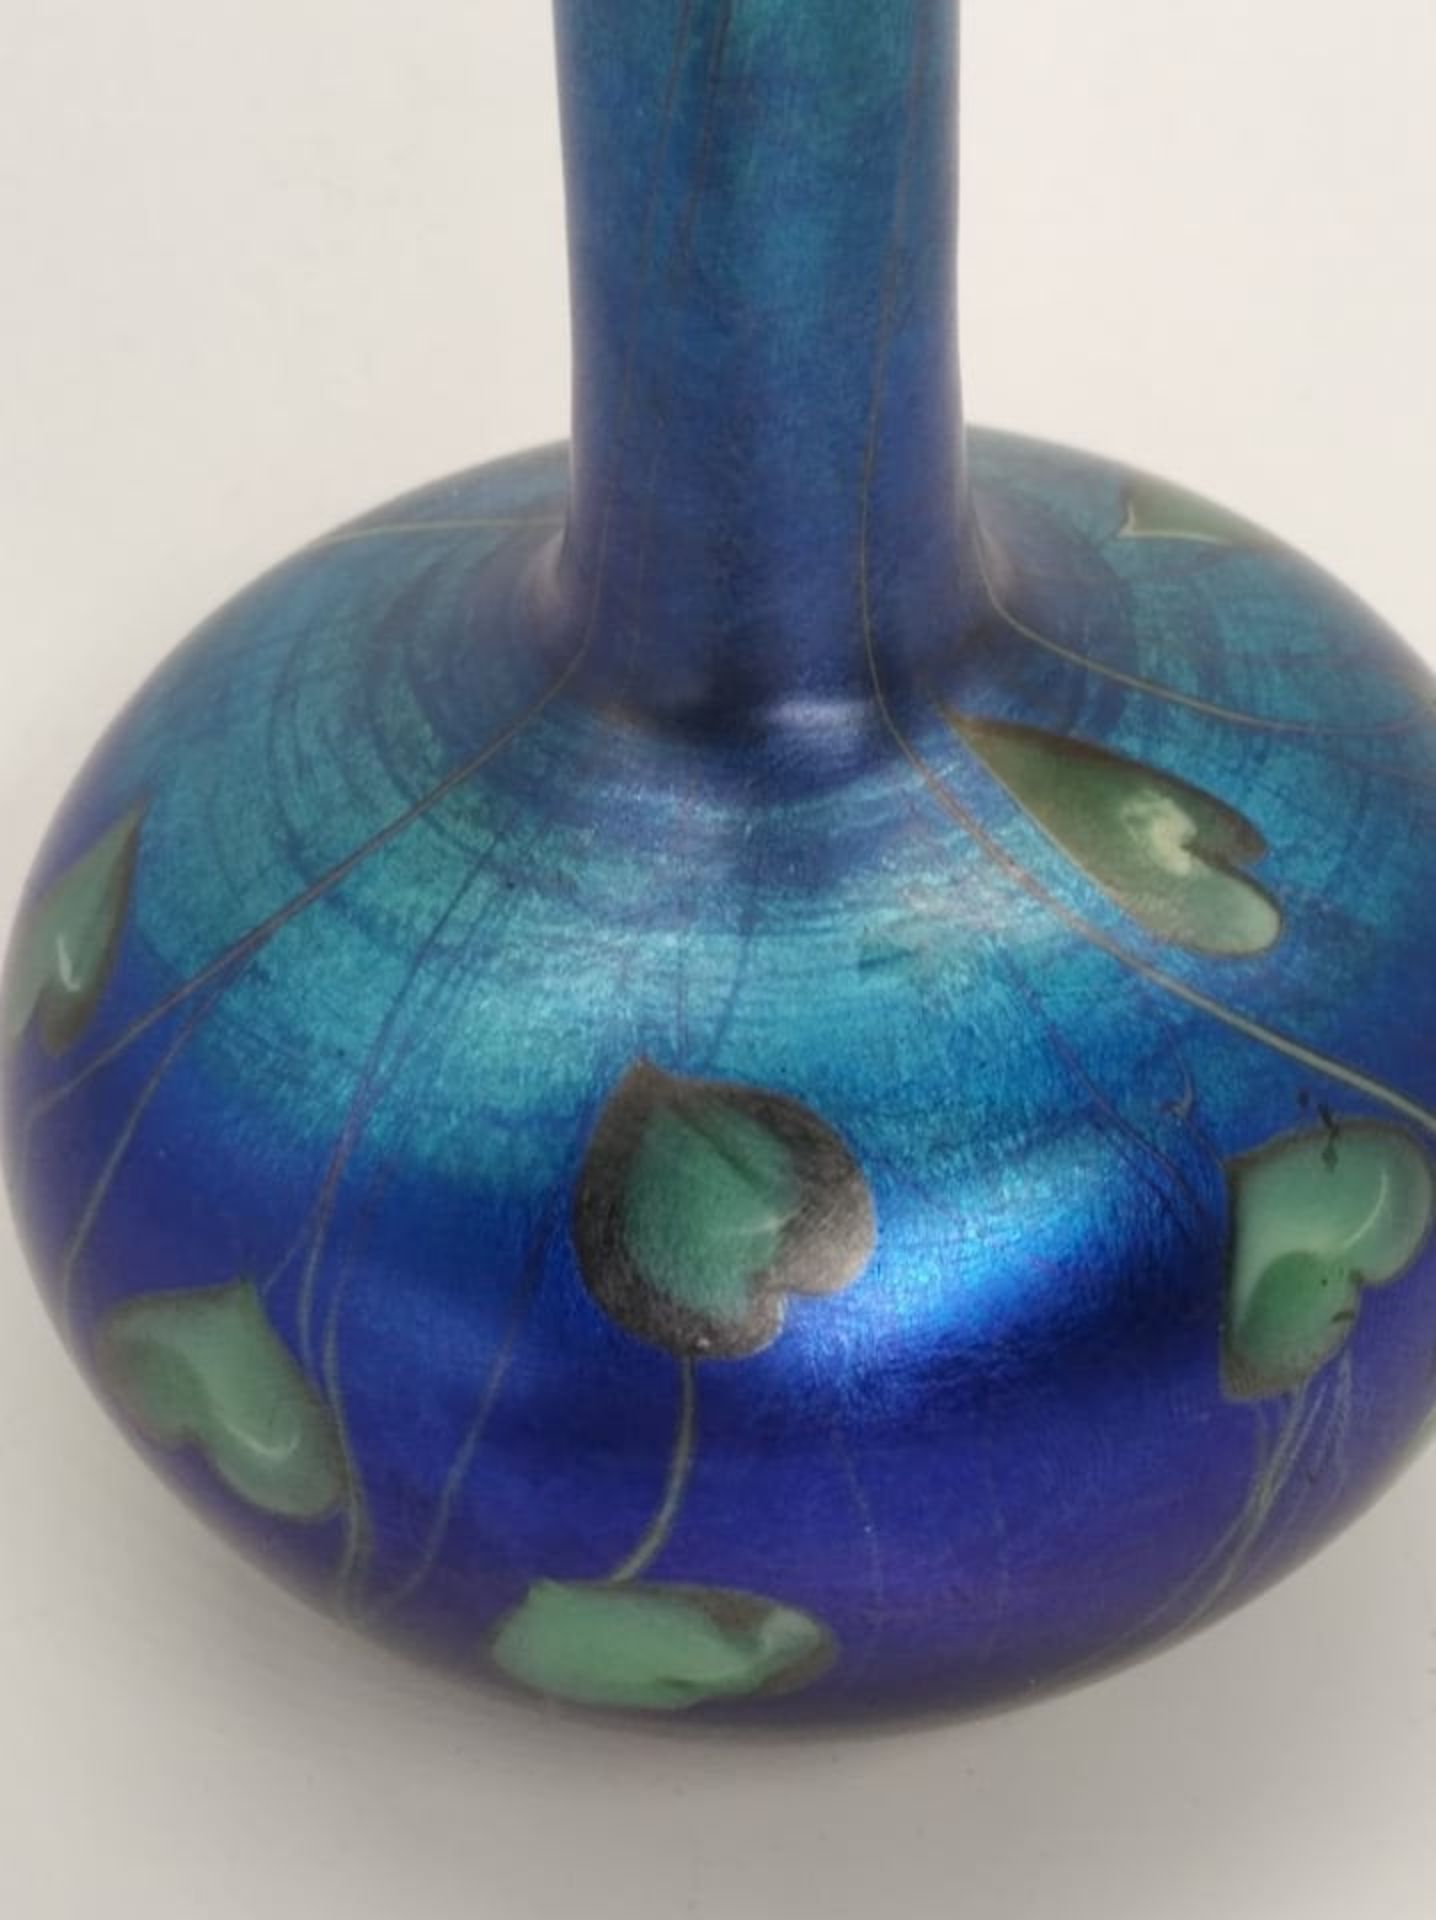 Tiffany Favrile "Hearts and Vines" Bud Vase - Image 3 of 4